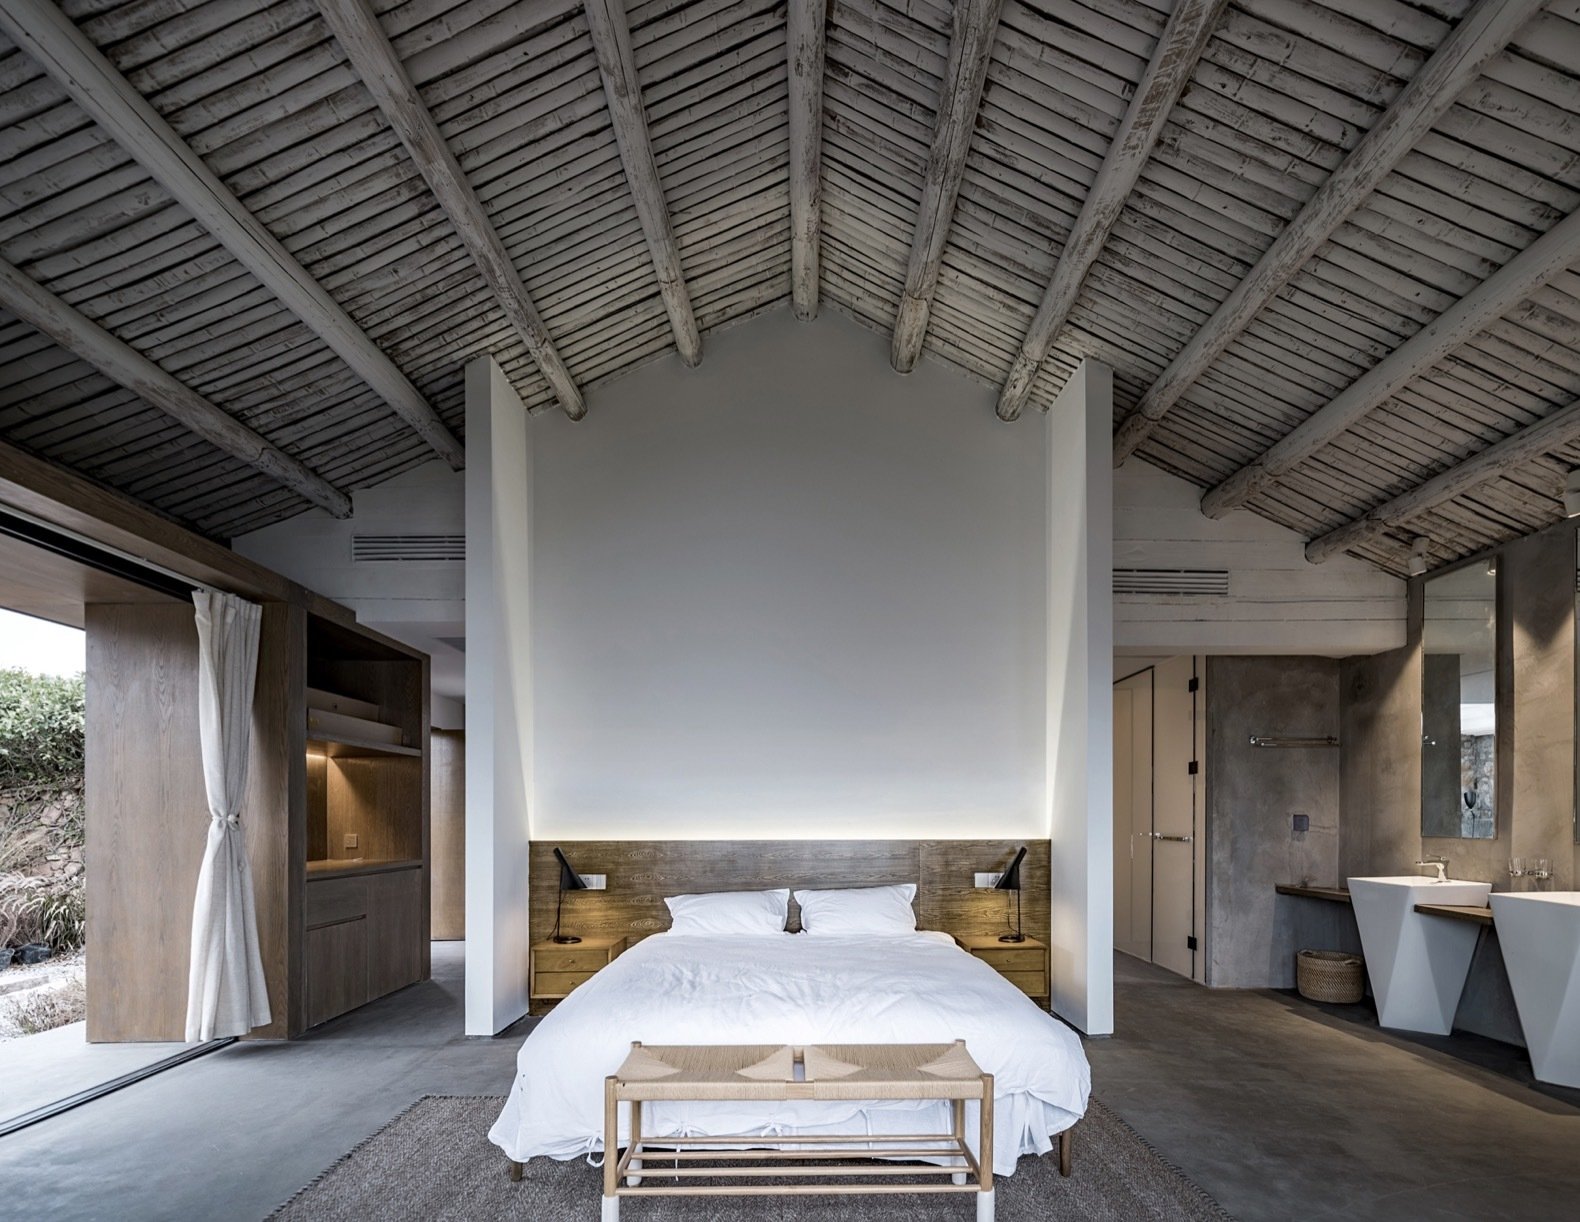 a-timber-beamed-ceiling-adds-a-rustic-touch-to-the-modern-master-suite